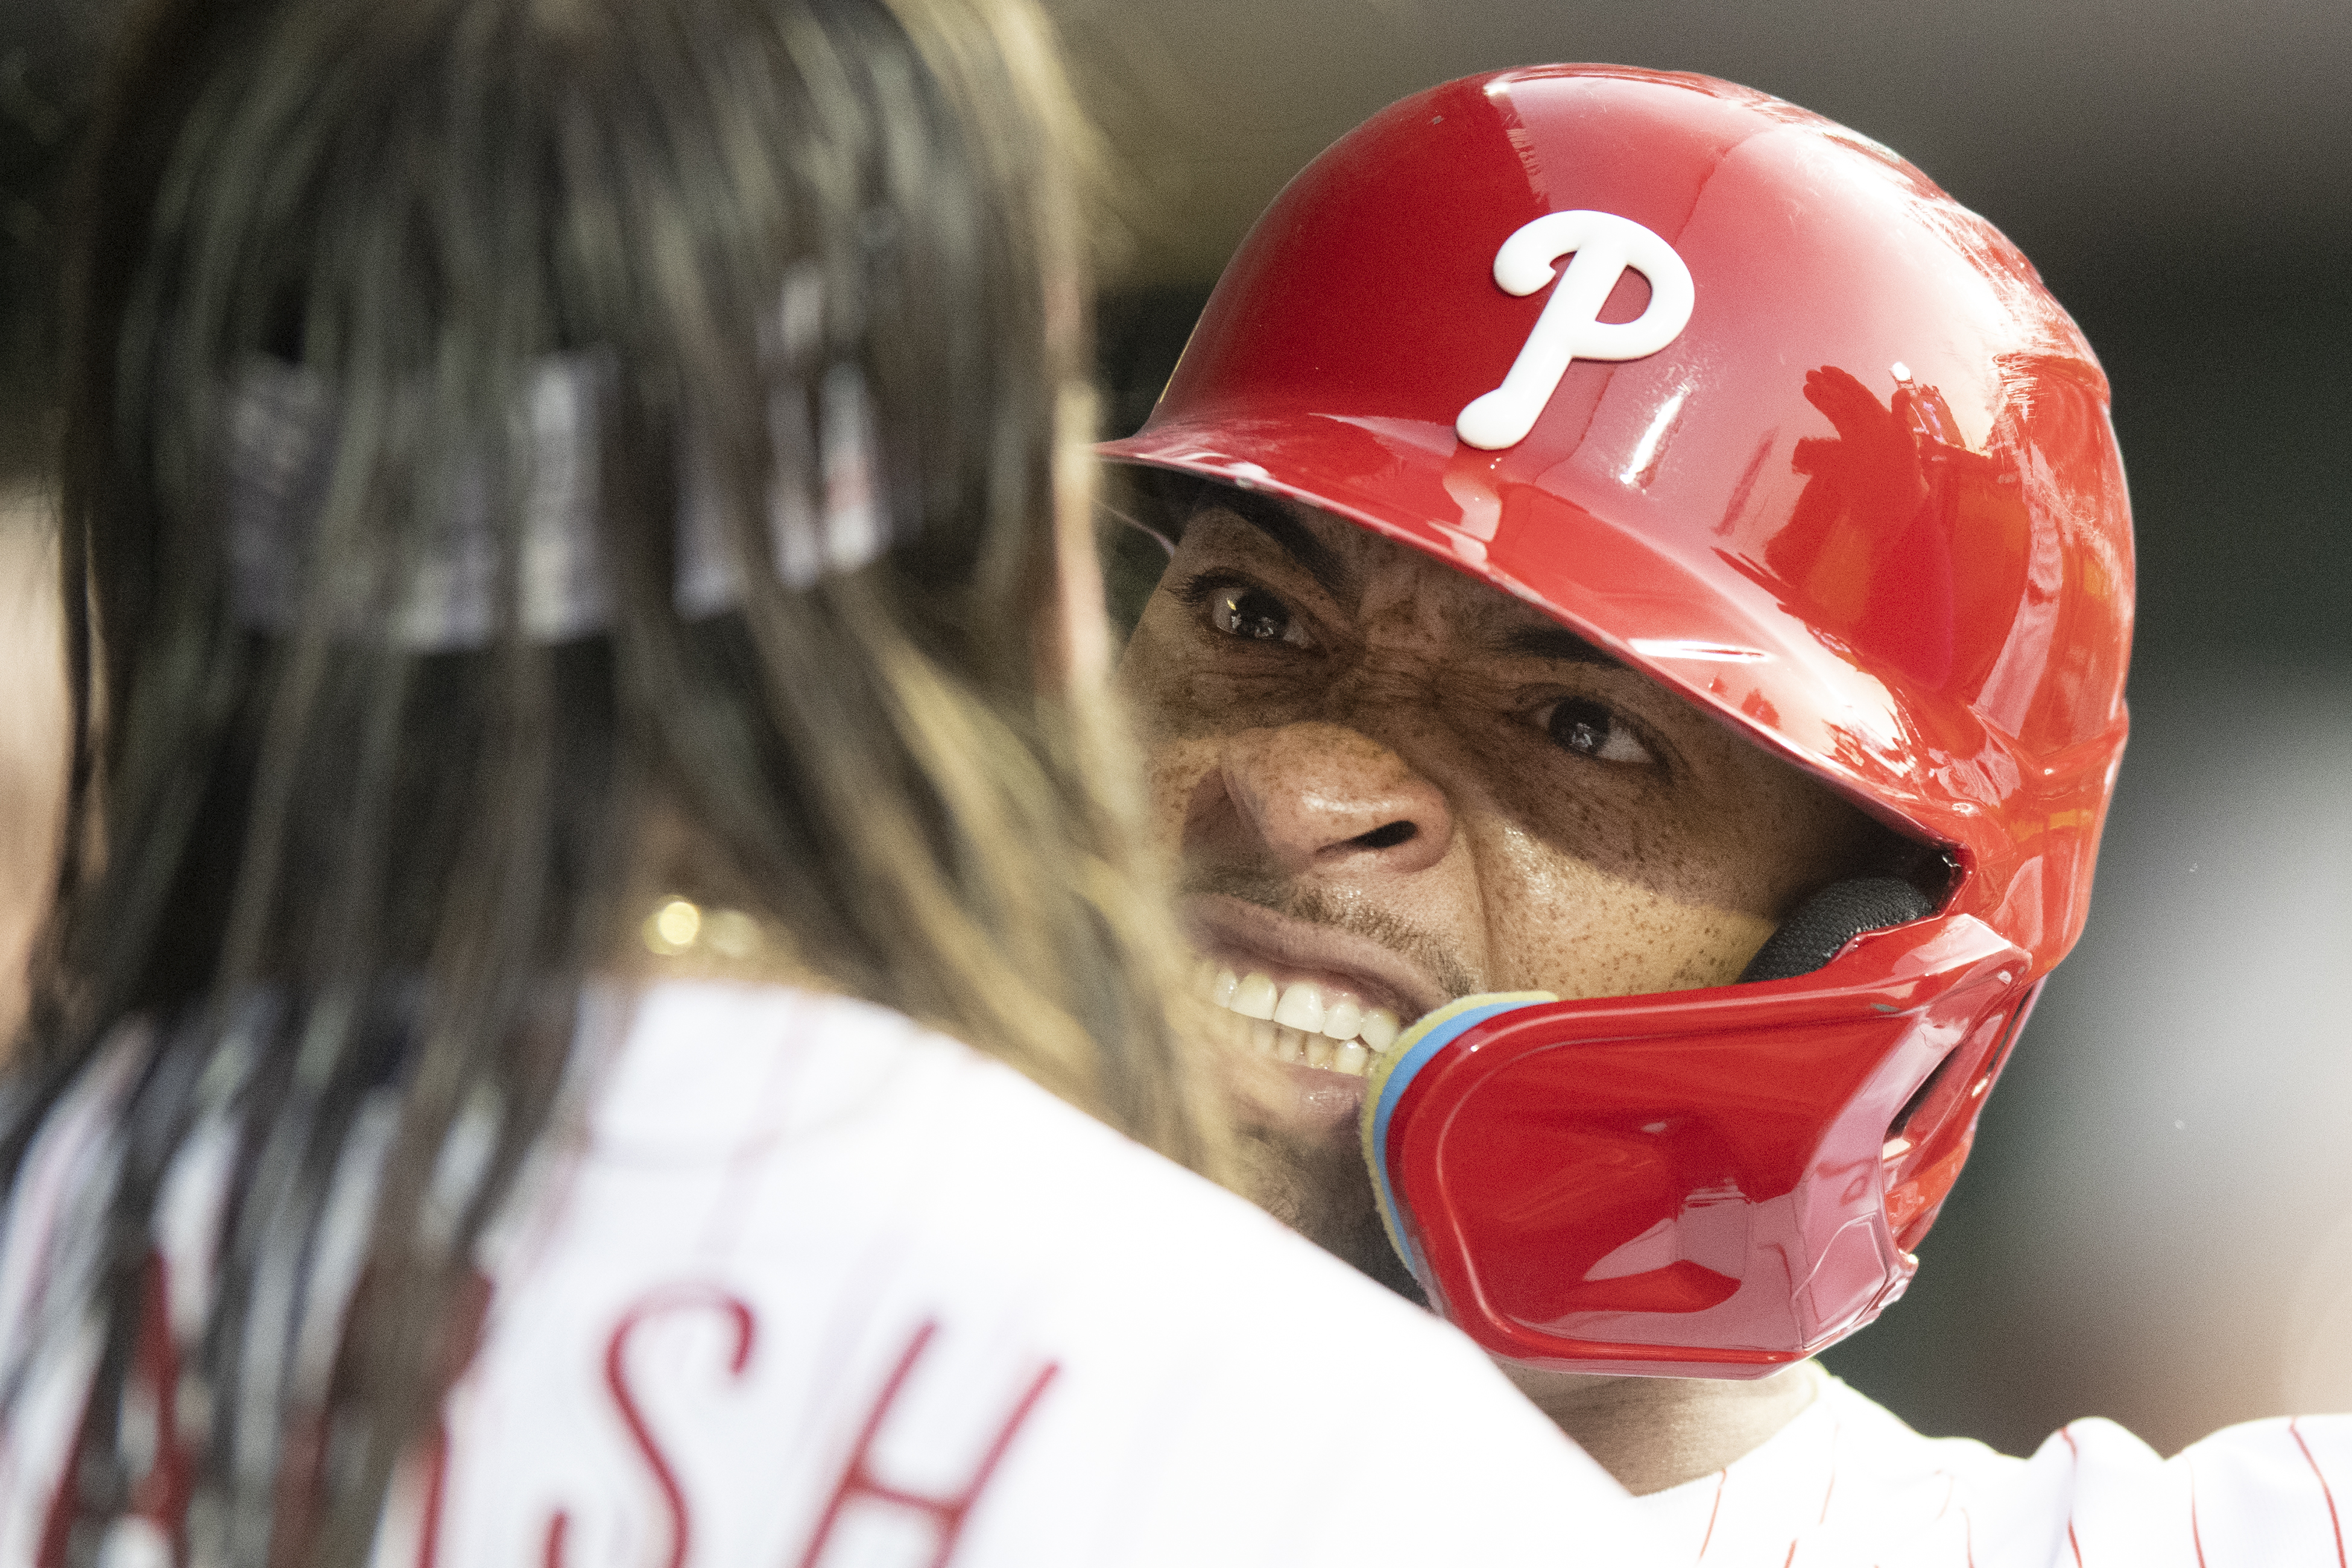 Sosa homer gives Phillies a win over the Orioles